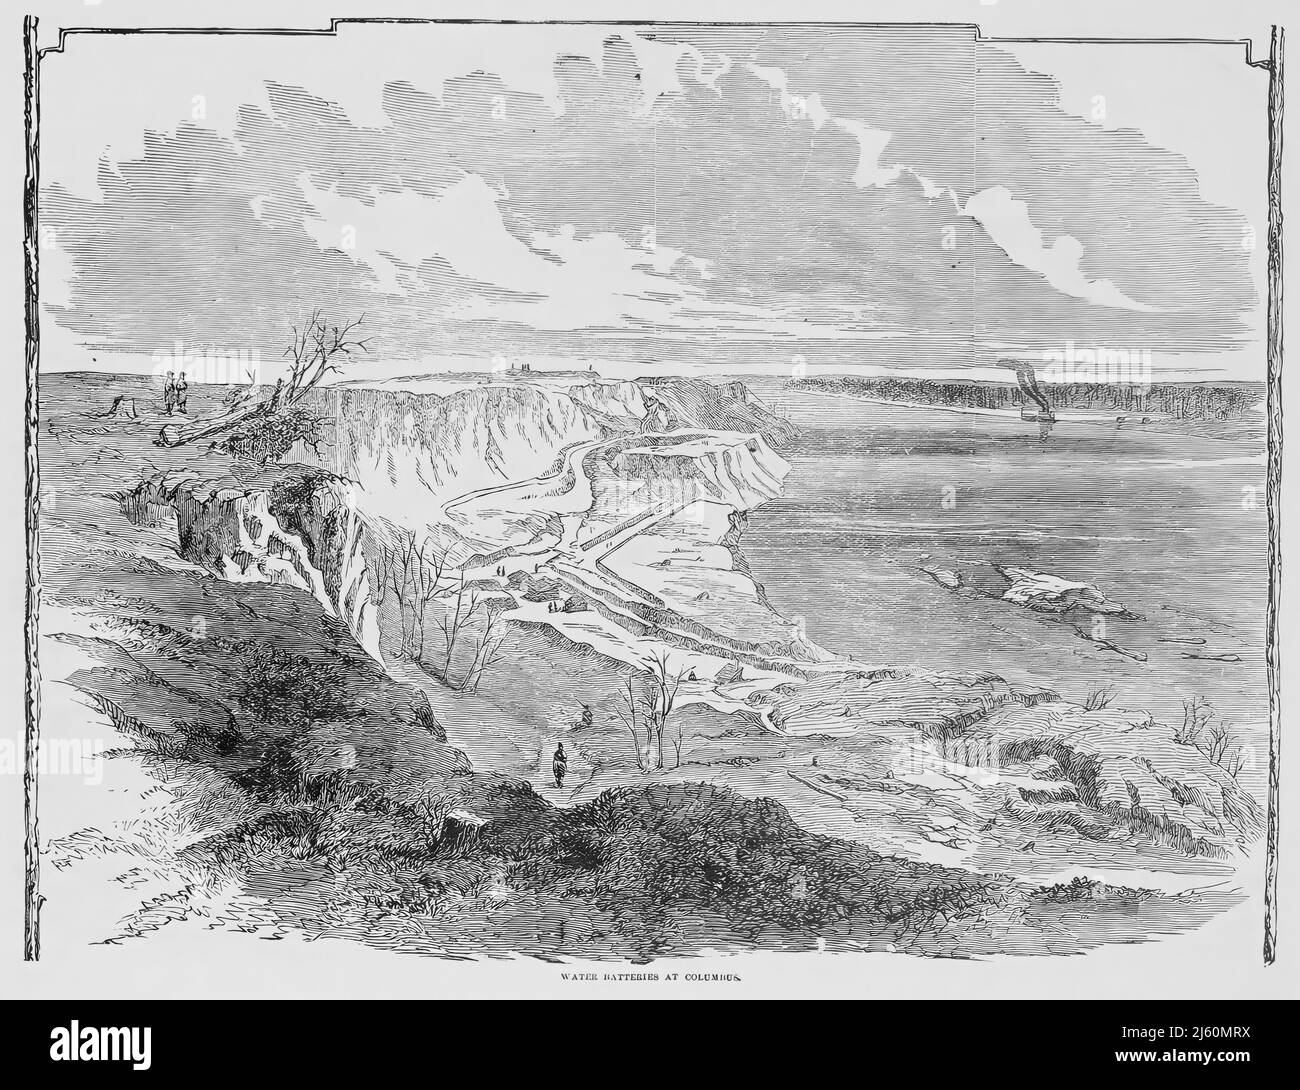 Water Batteries at Columbus, Kentucky, in the American Civil War. 19th century illustration Stock Photo